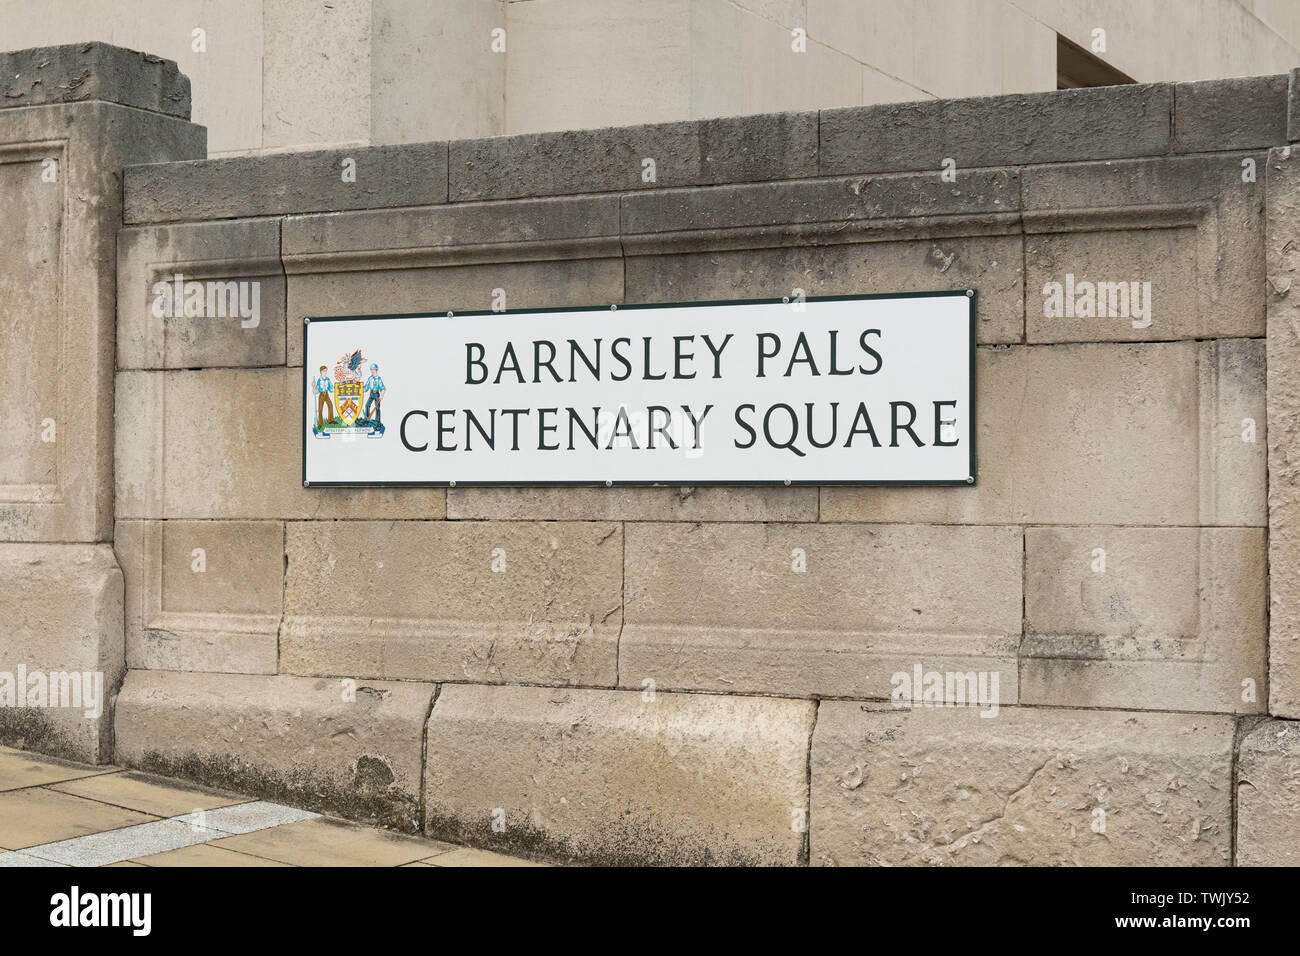 Barnsley Pals Centenary Square sign - commemorating the Barnsley Pals battalions who lost their lives in the First World War, Barnsley, England, UK Stock Photo